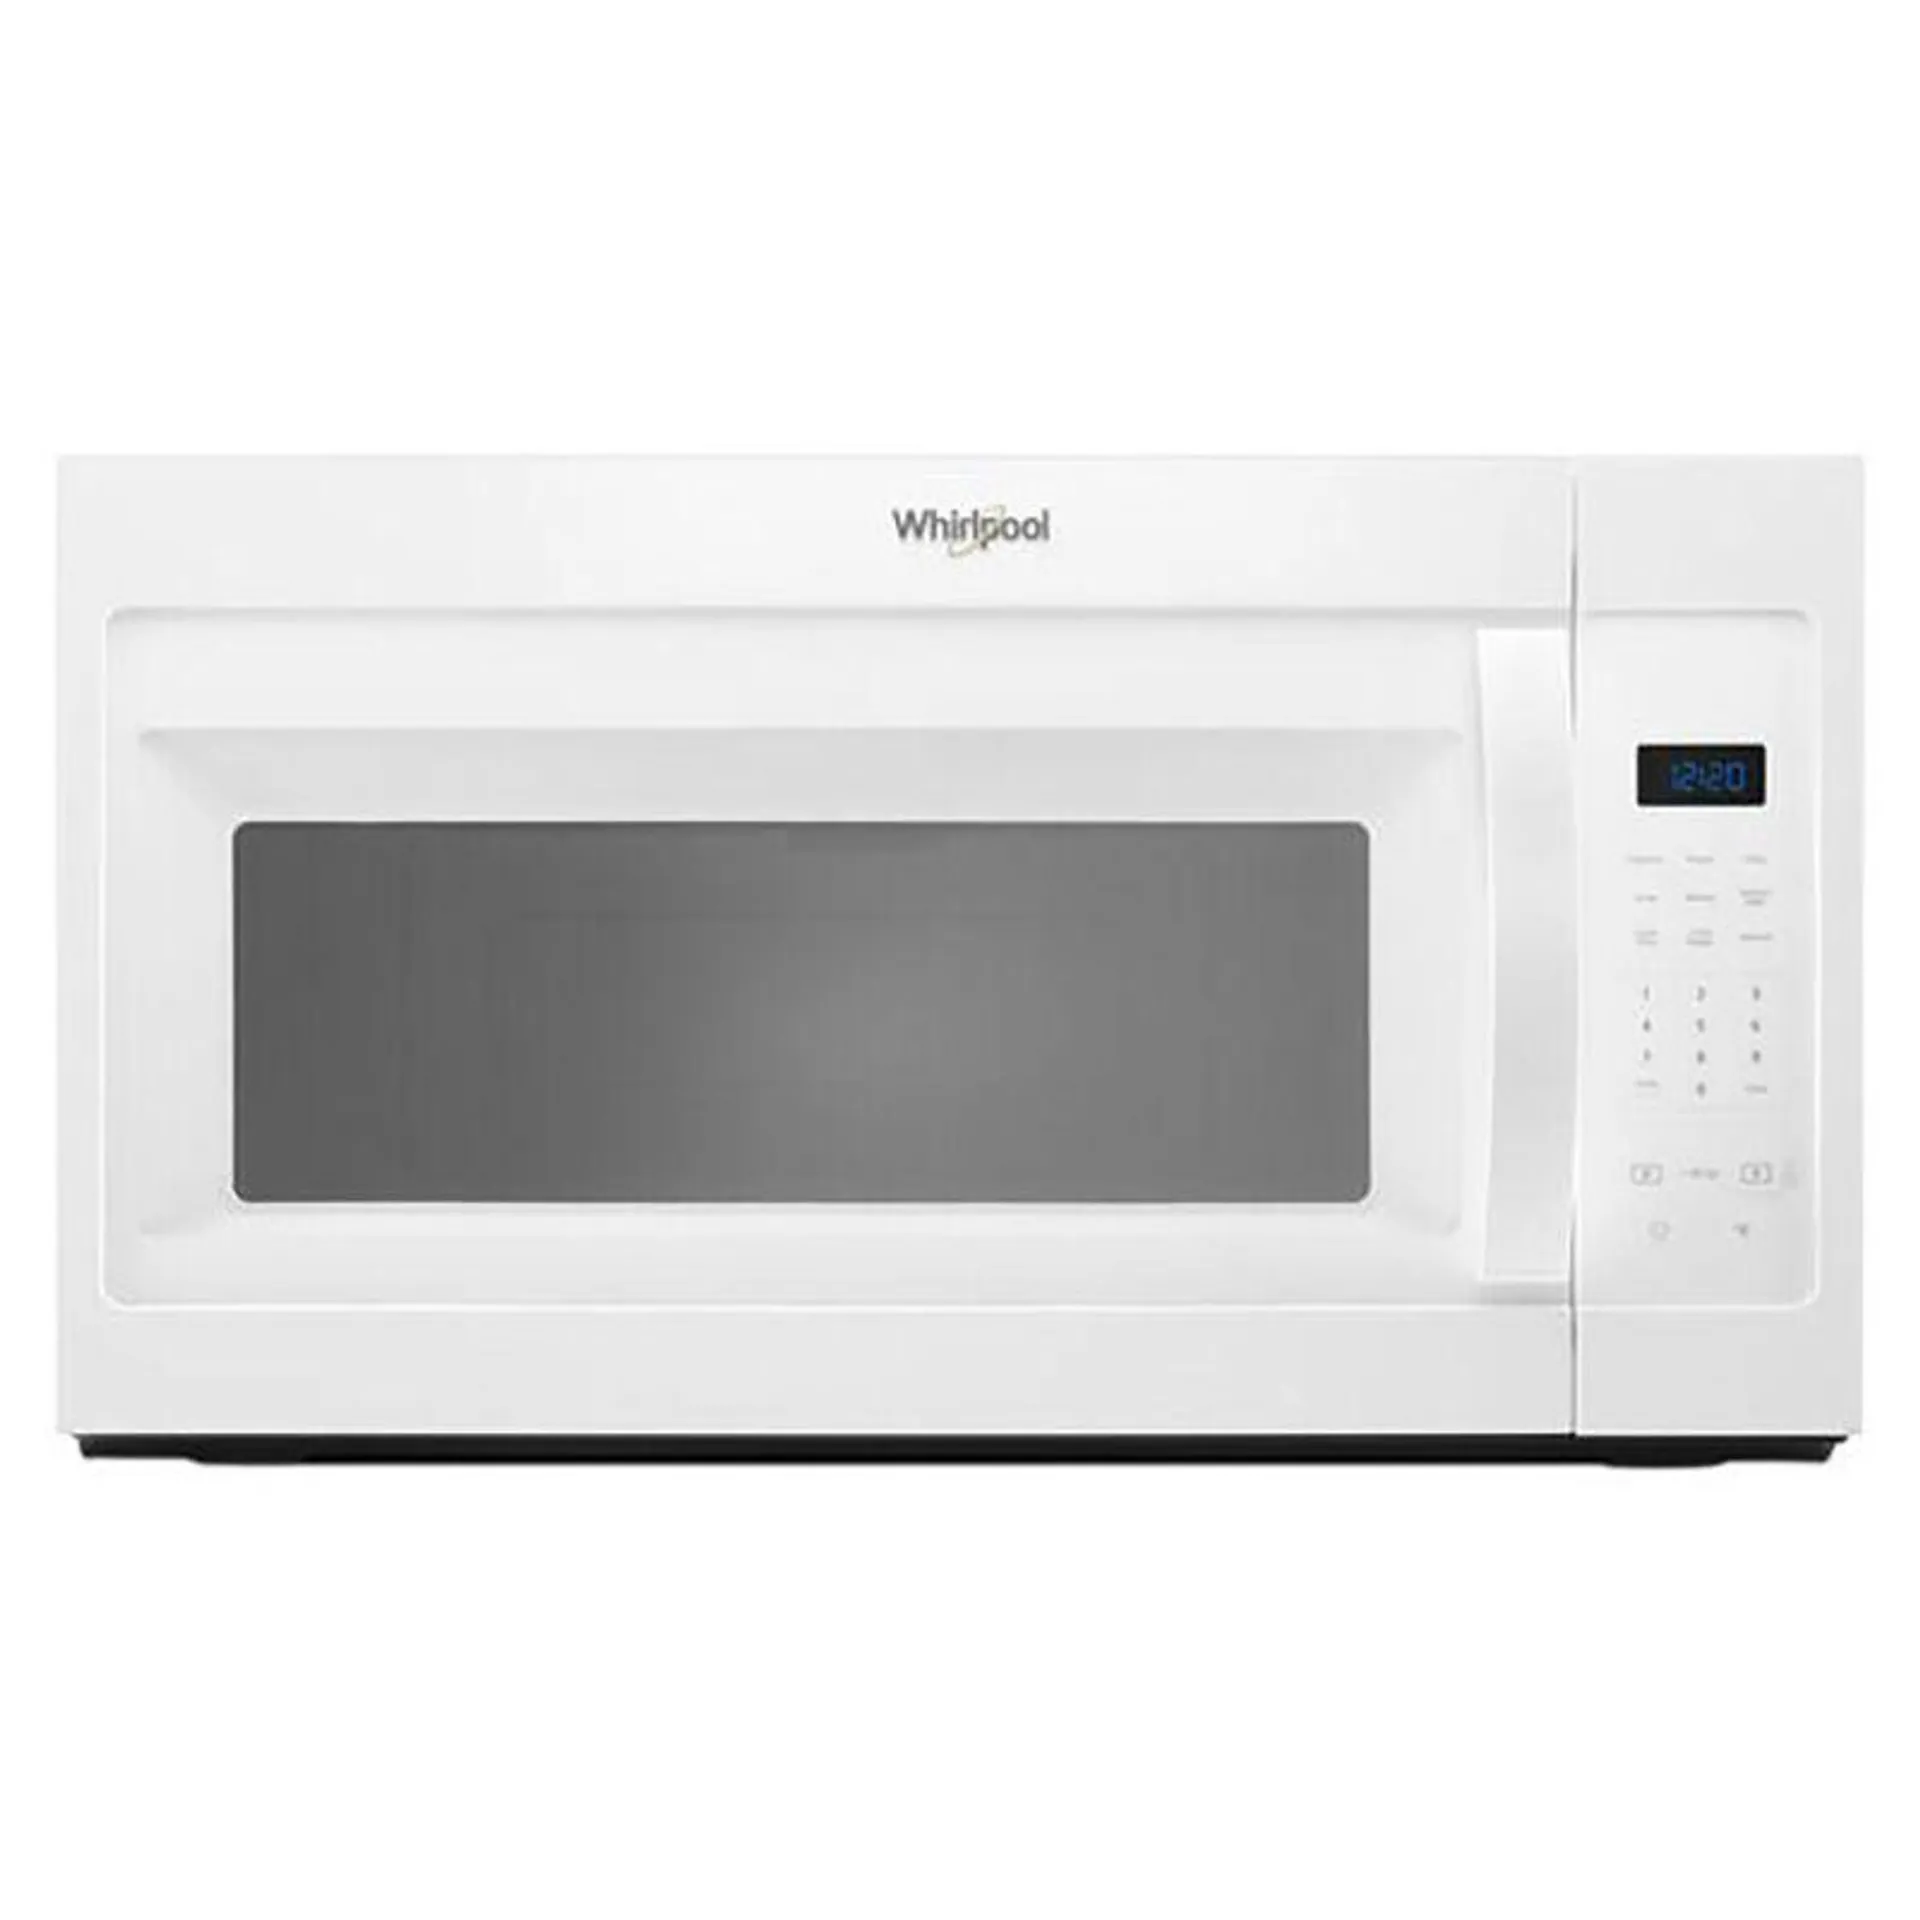 Whirlpool 30" 1.7 Cu. Ft. Over-the-Range Microwave with 10 Power Levels & 300 CFM - White